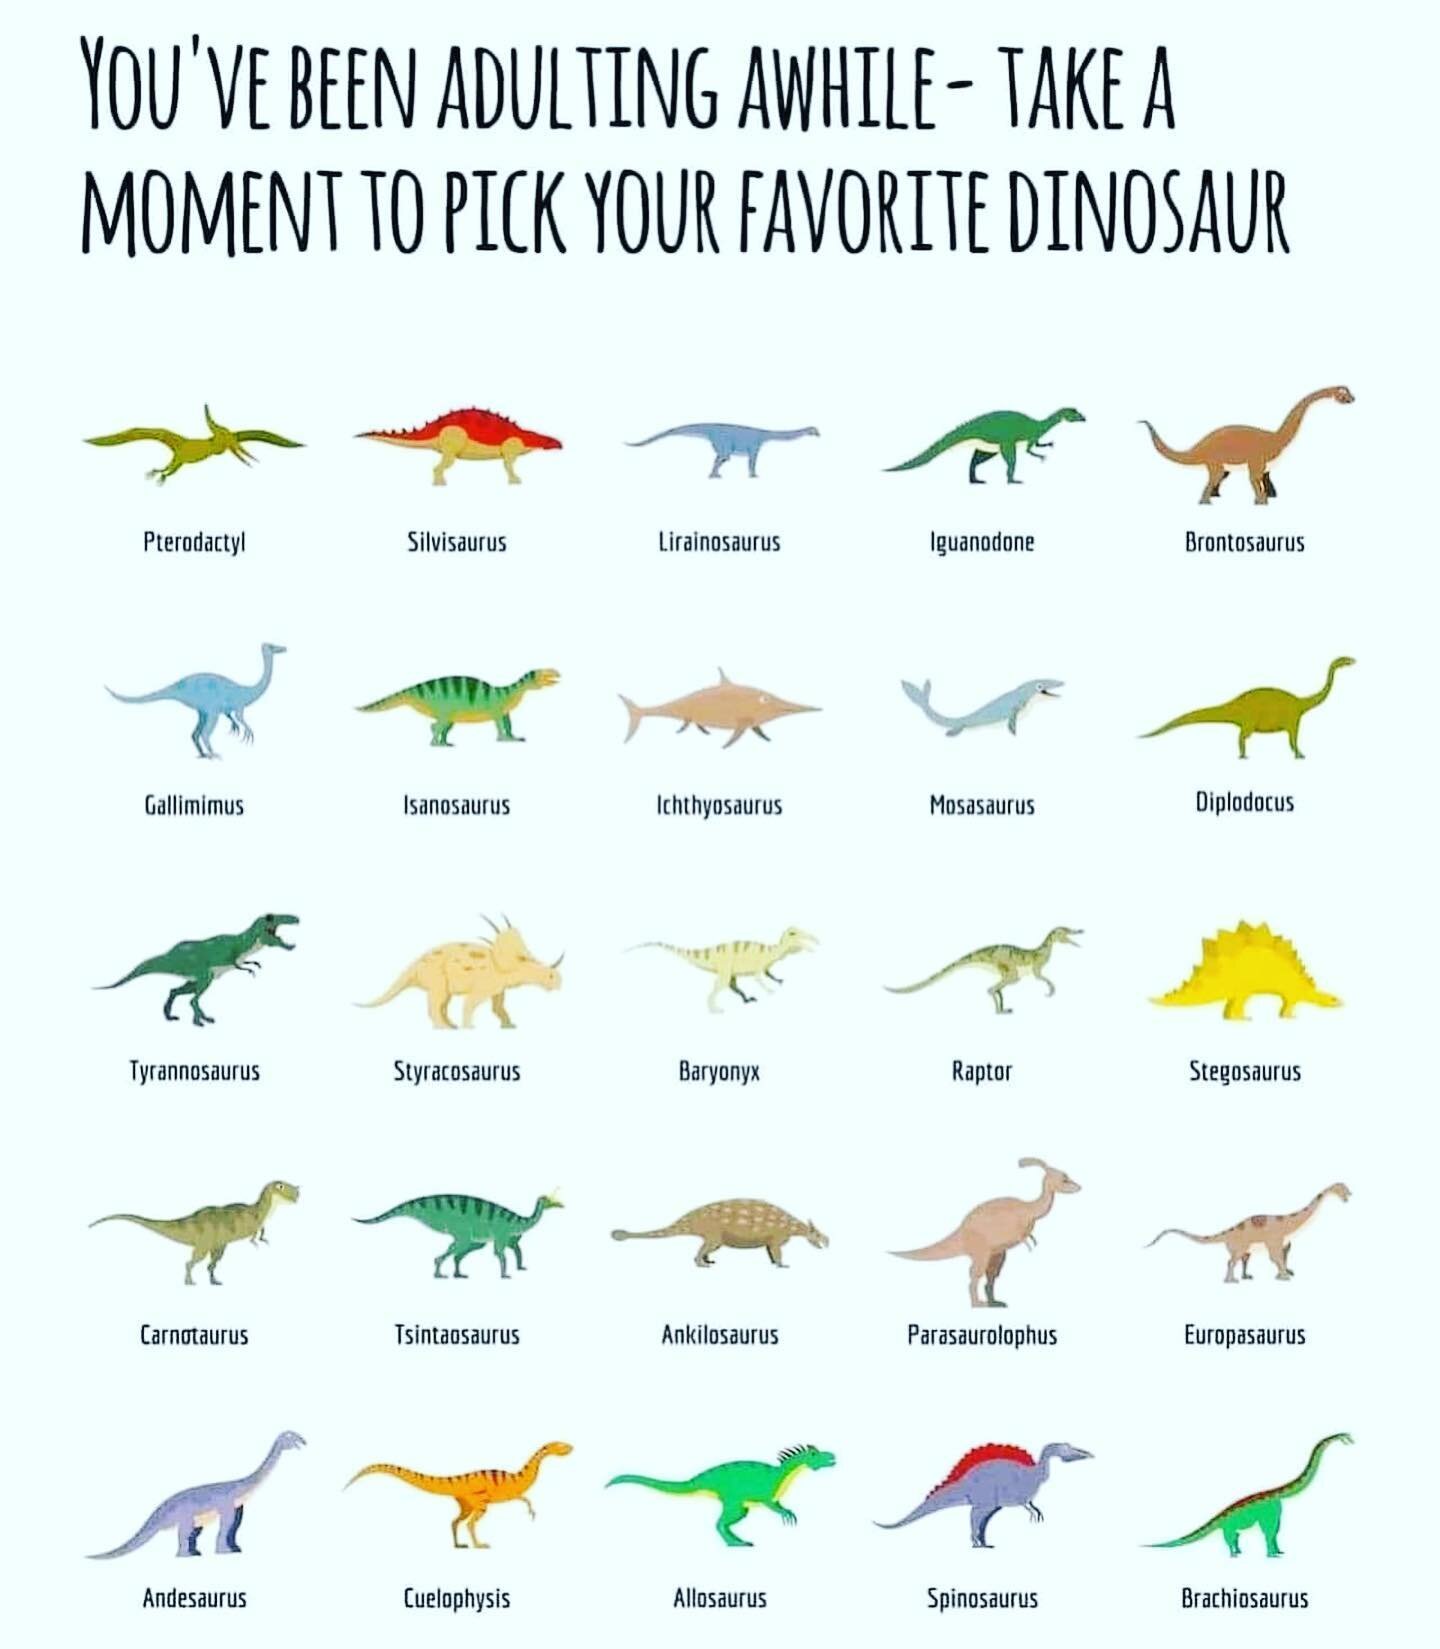 I enjoy a good brontosaurus. Seems like a chill Dino 🦕 
.
Happy Saturday! Open until 8pm tonight, come by to make a slime, splatter a canvas, make a pour painting, or tie and dye a Tshirt.